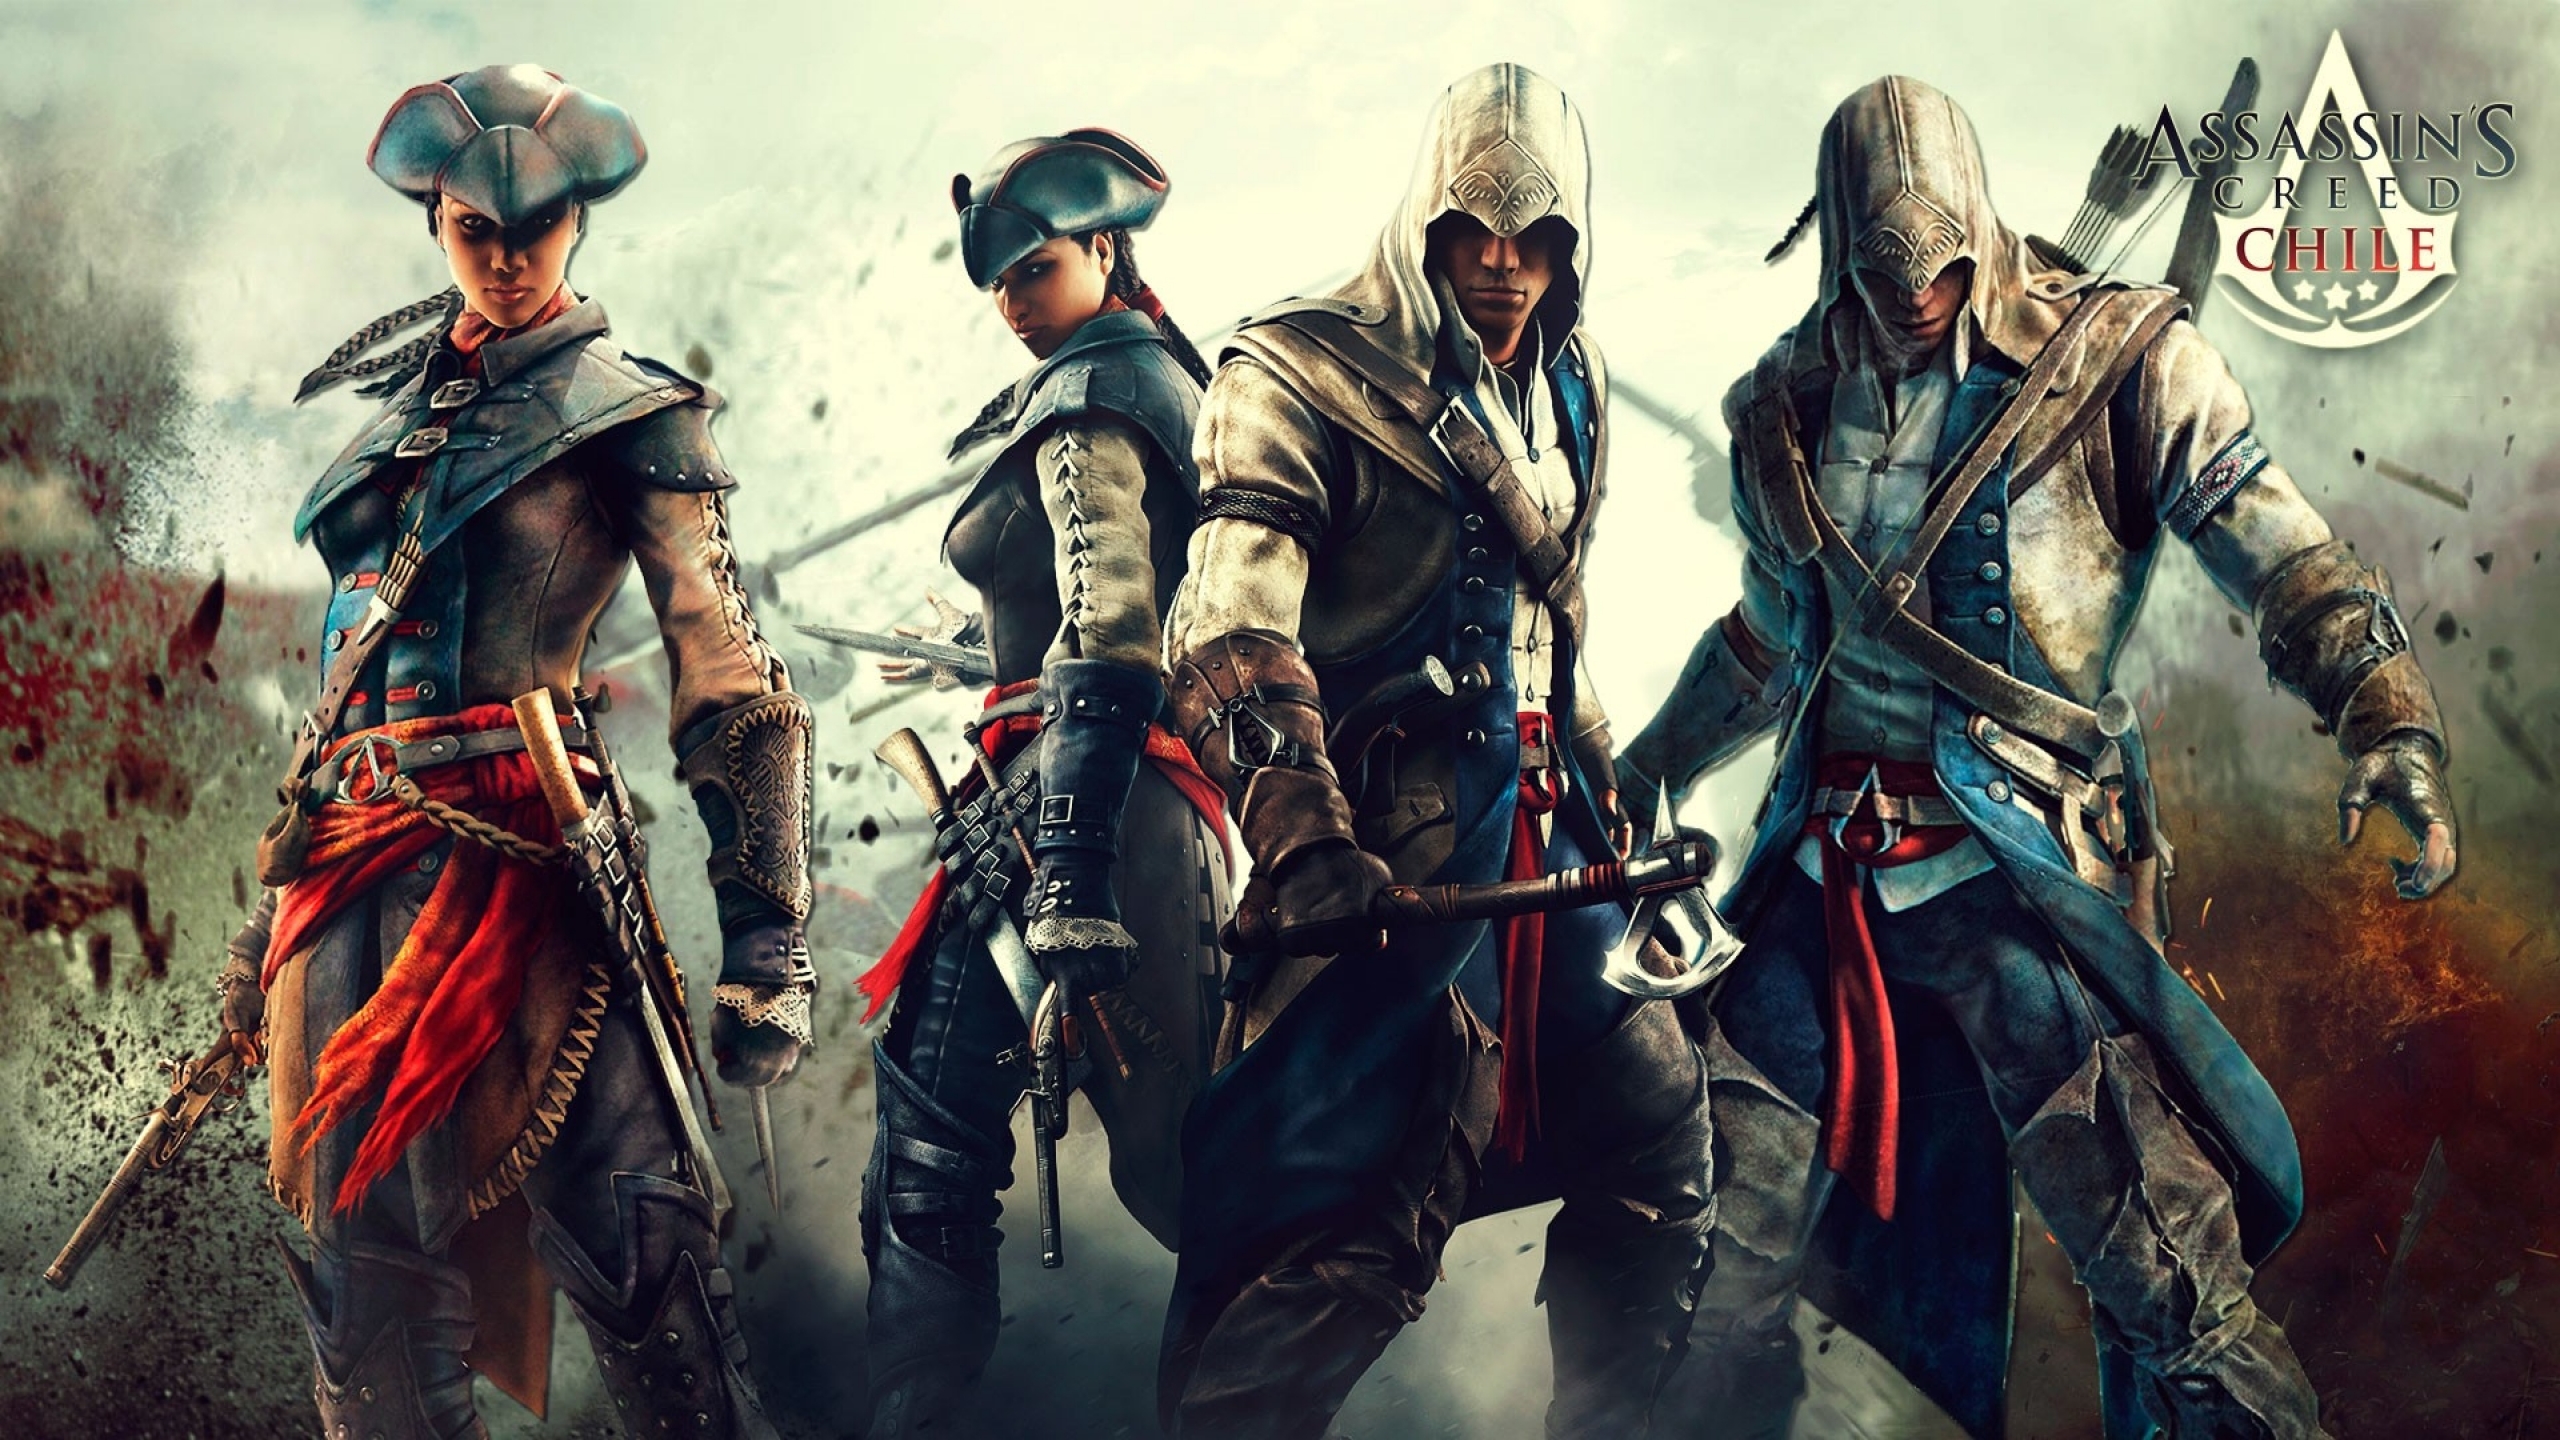 assassin's creed iii, video game, assassin's creed Free Stock Photo